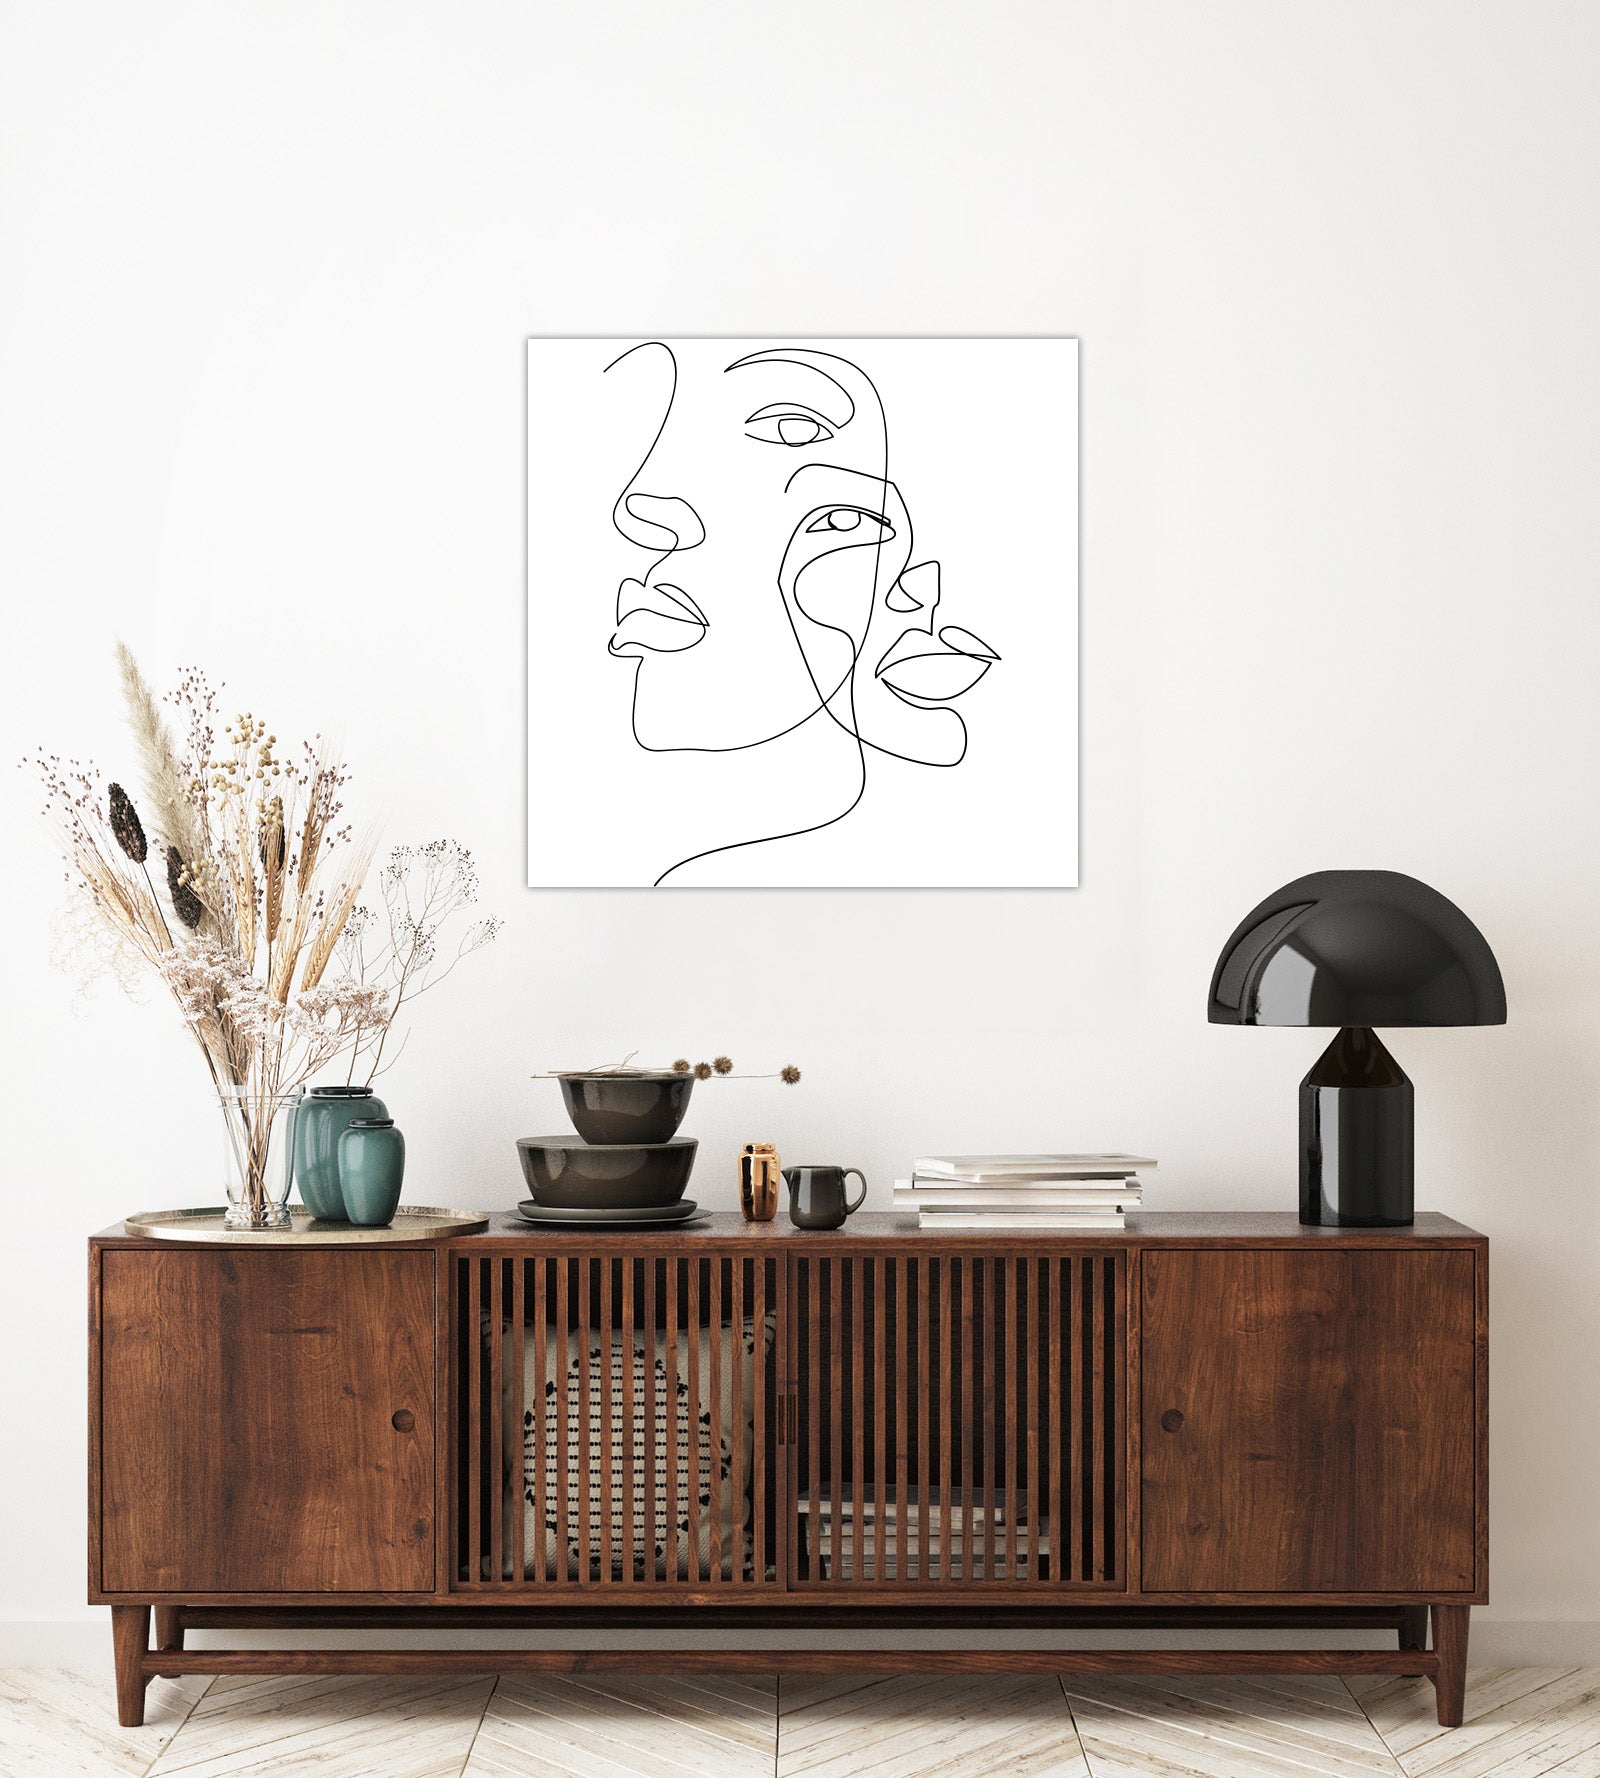 "Line Art Wall Painting (Two Overlapping Faces) "